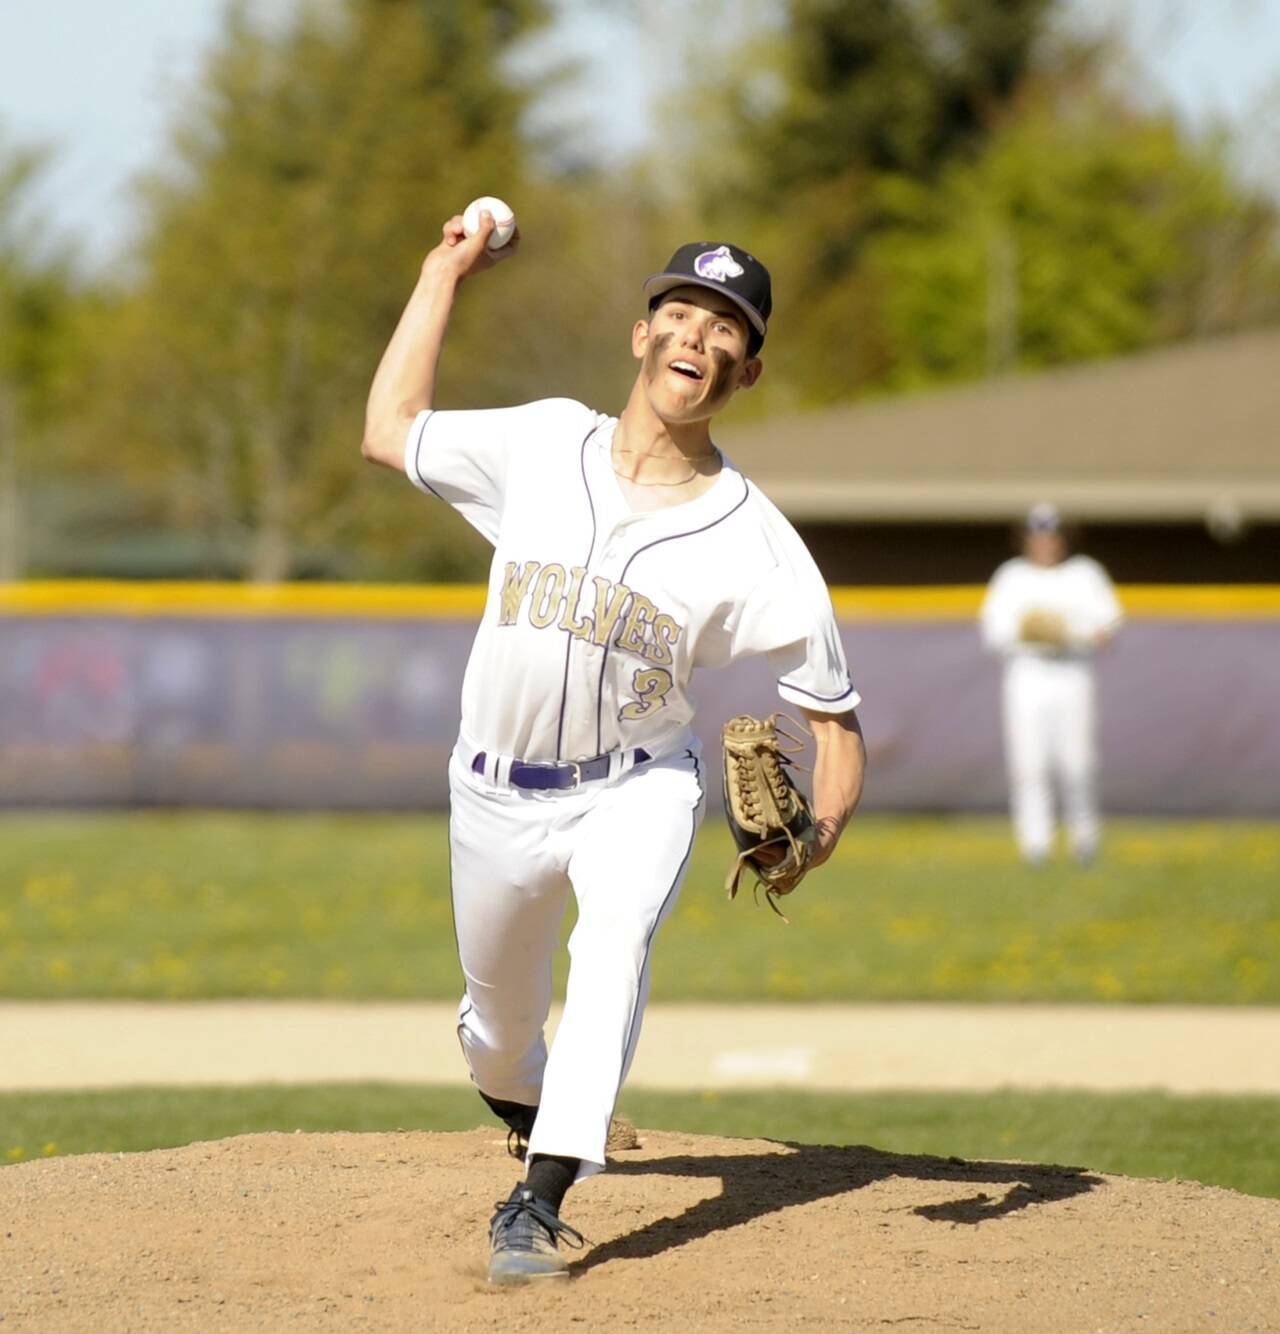 Michael Dashiell/Olympic Peninsula News Group Sequim’s Ethan Staples, shown here pitching during a win over Kingston last month, struck out seven and drove in two runs in the Wolves’ 7-3 bi-district tournament win over Fife on Wednesday.